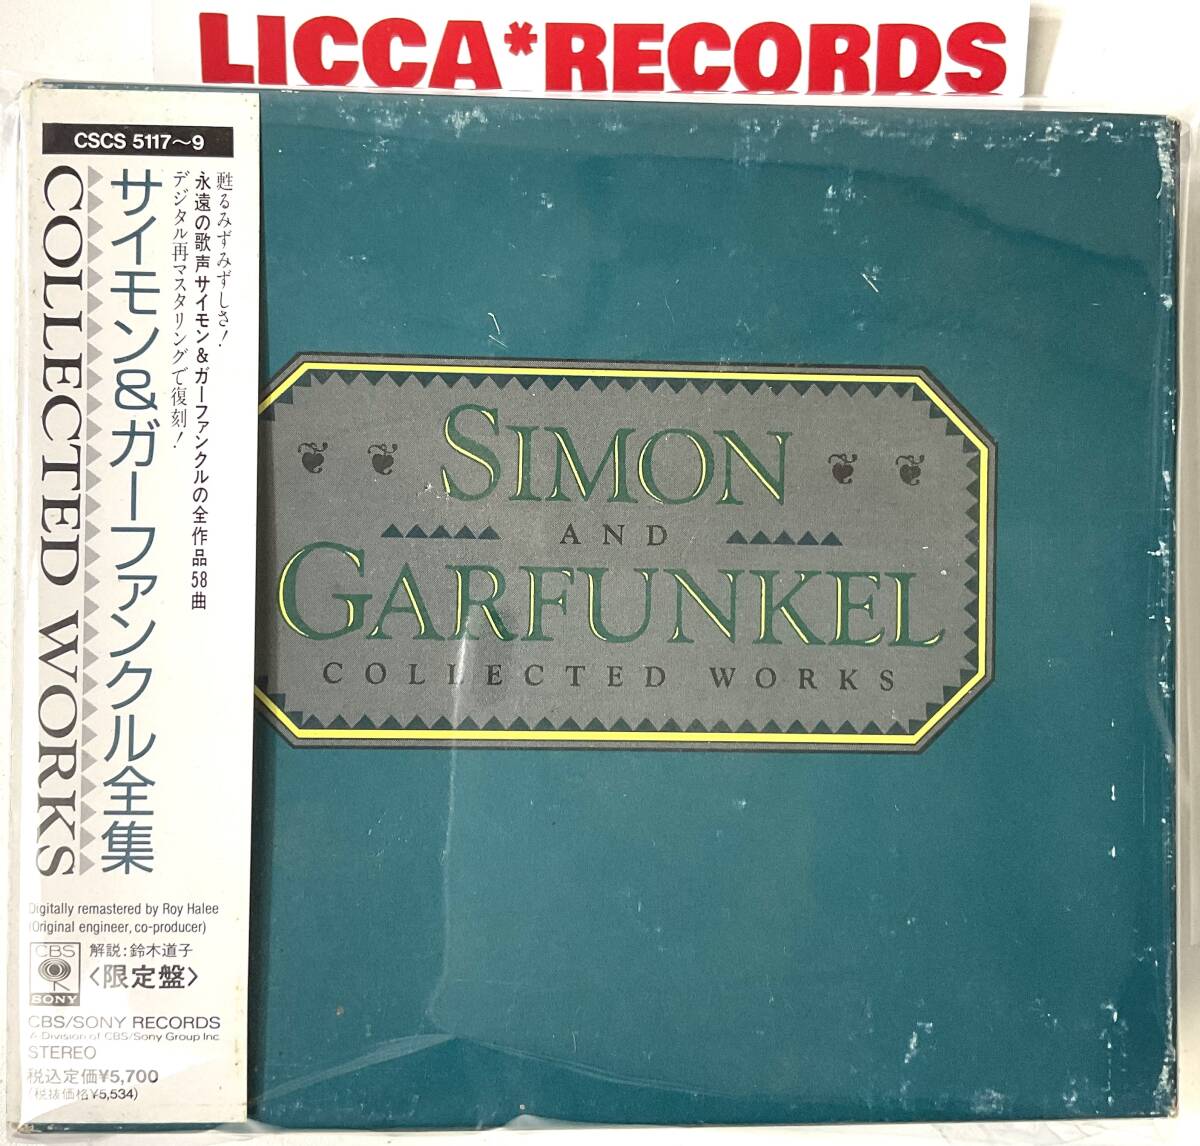 DIGITALLY REMASTERED LIMITED EDITION 3xCD Simon & Garfunkel - Collected Works BOX SET w/OBI BOOKLET JP 1990 LICCA*RECORDS 574 RARE_画像1